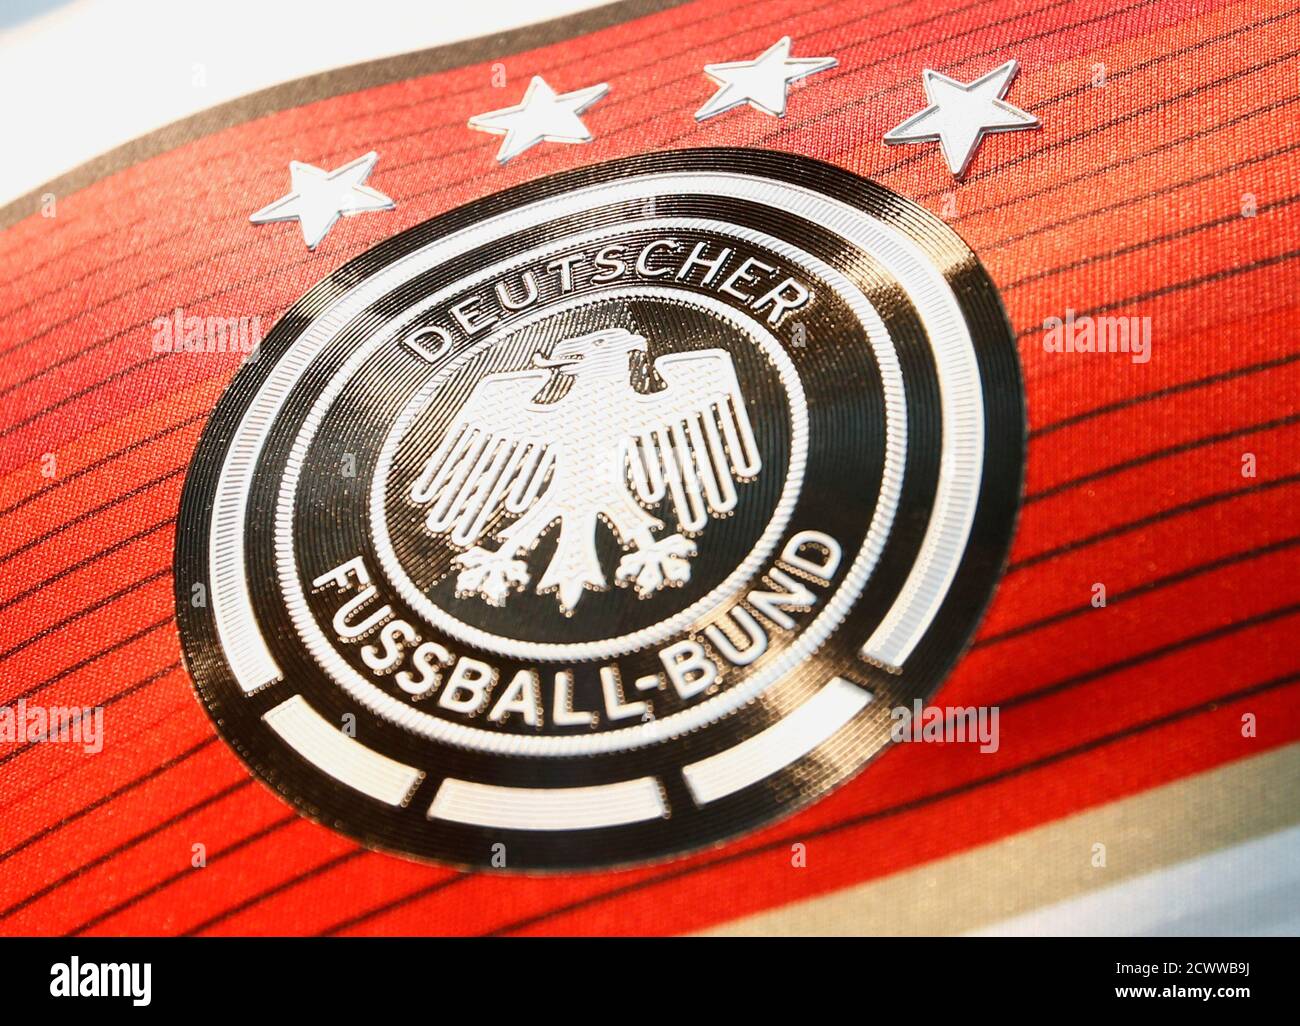 A memorabilia jersey of the German national soccer team showing four stars,  symbolizing the number of reached World Cup championships, is seen at an  Adidas retailer in Frankfurt July 14, 2014. Germany